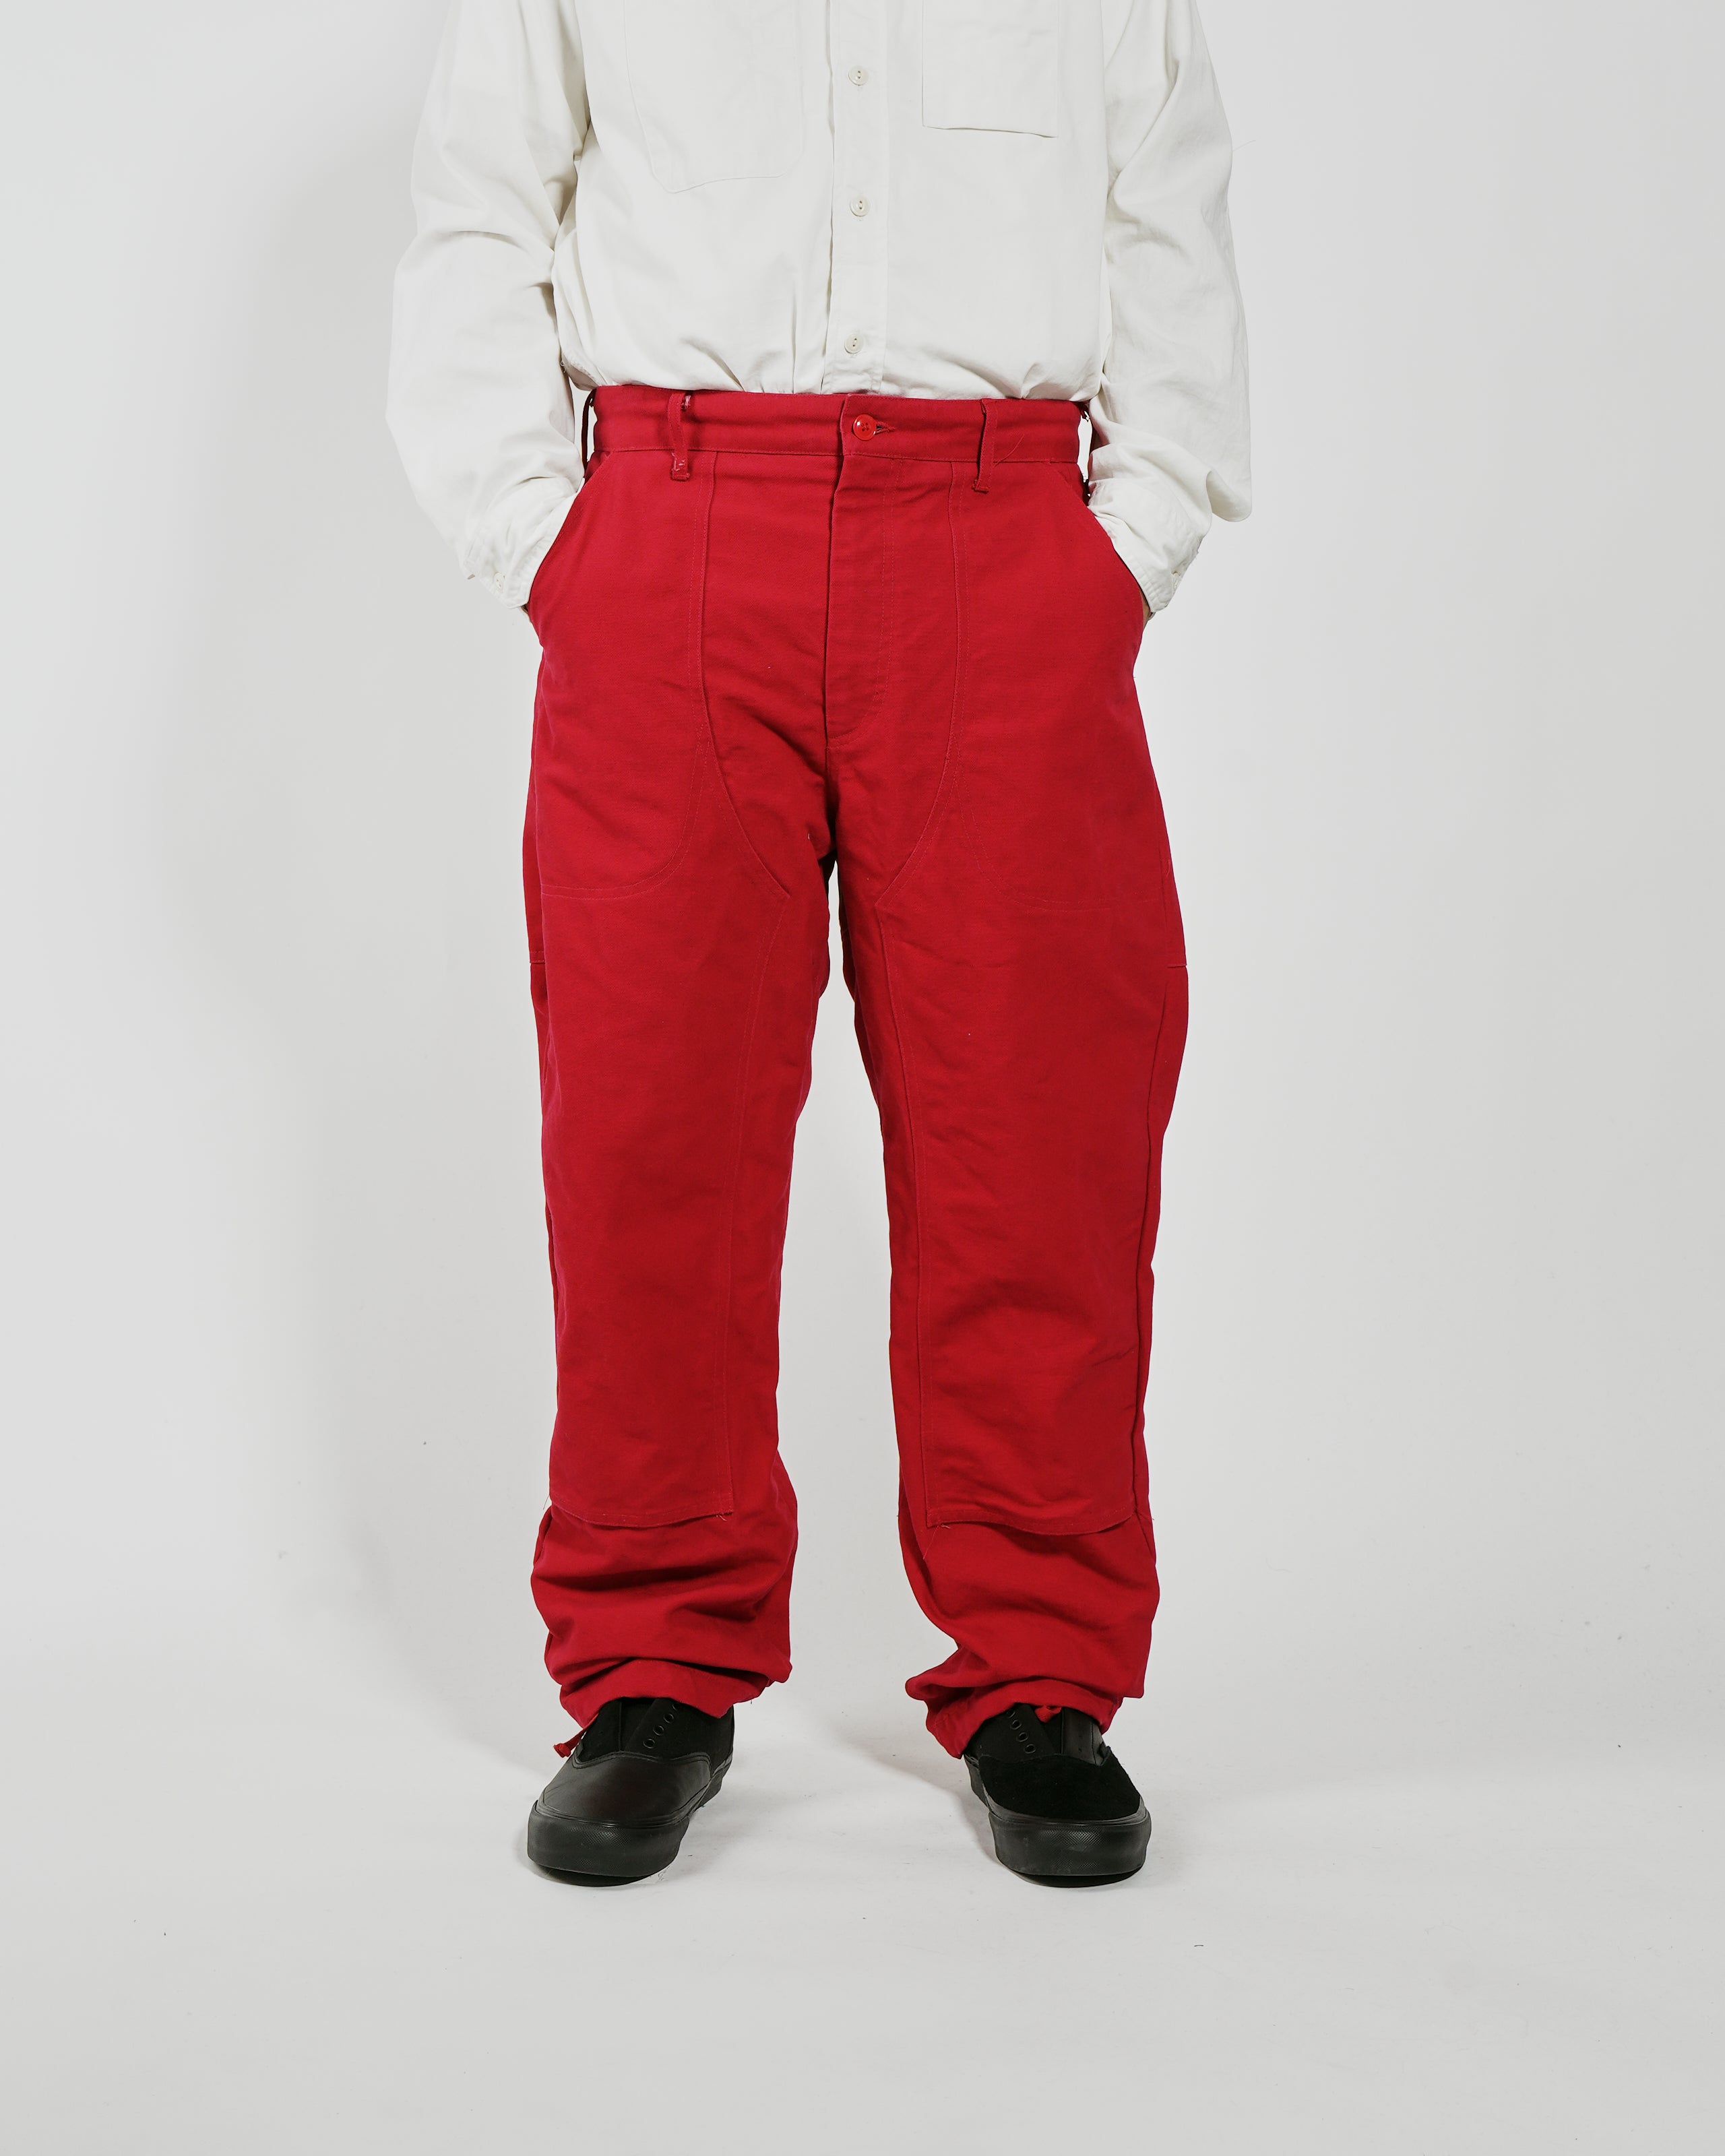 Climbing Pant - Red 12oz Duck Canvas